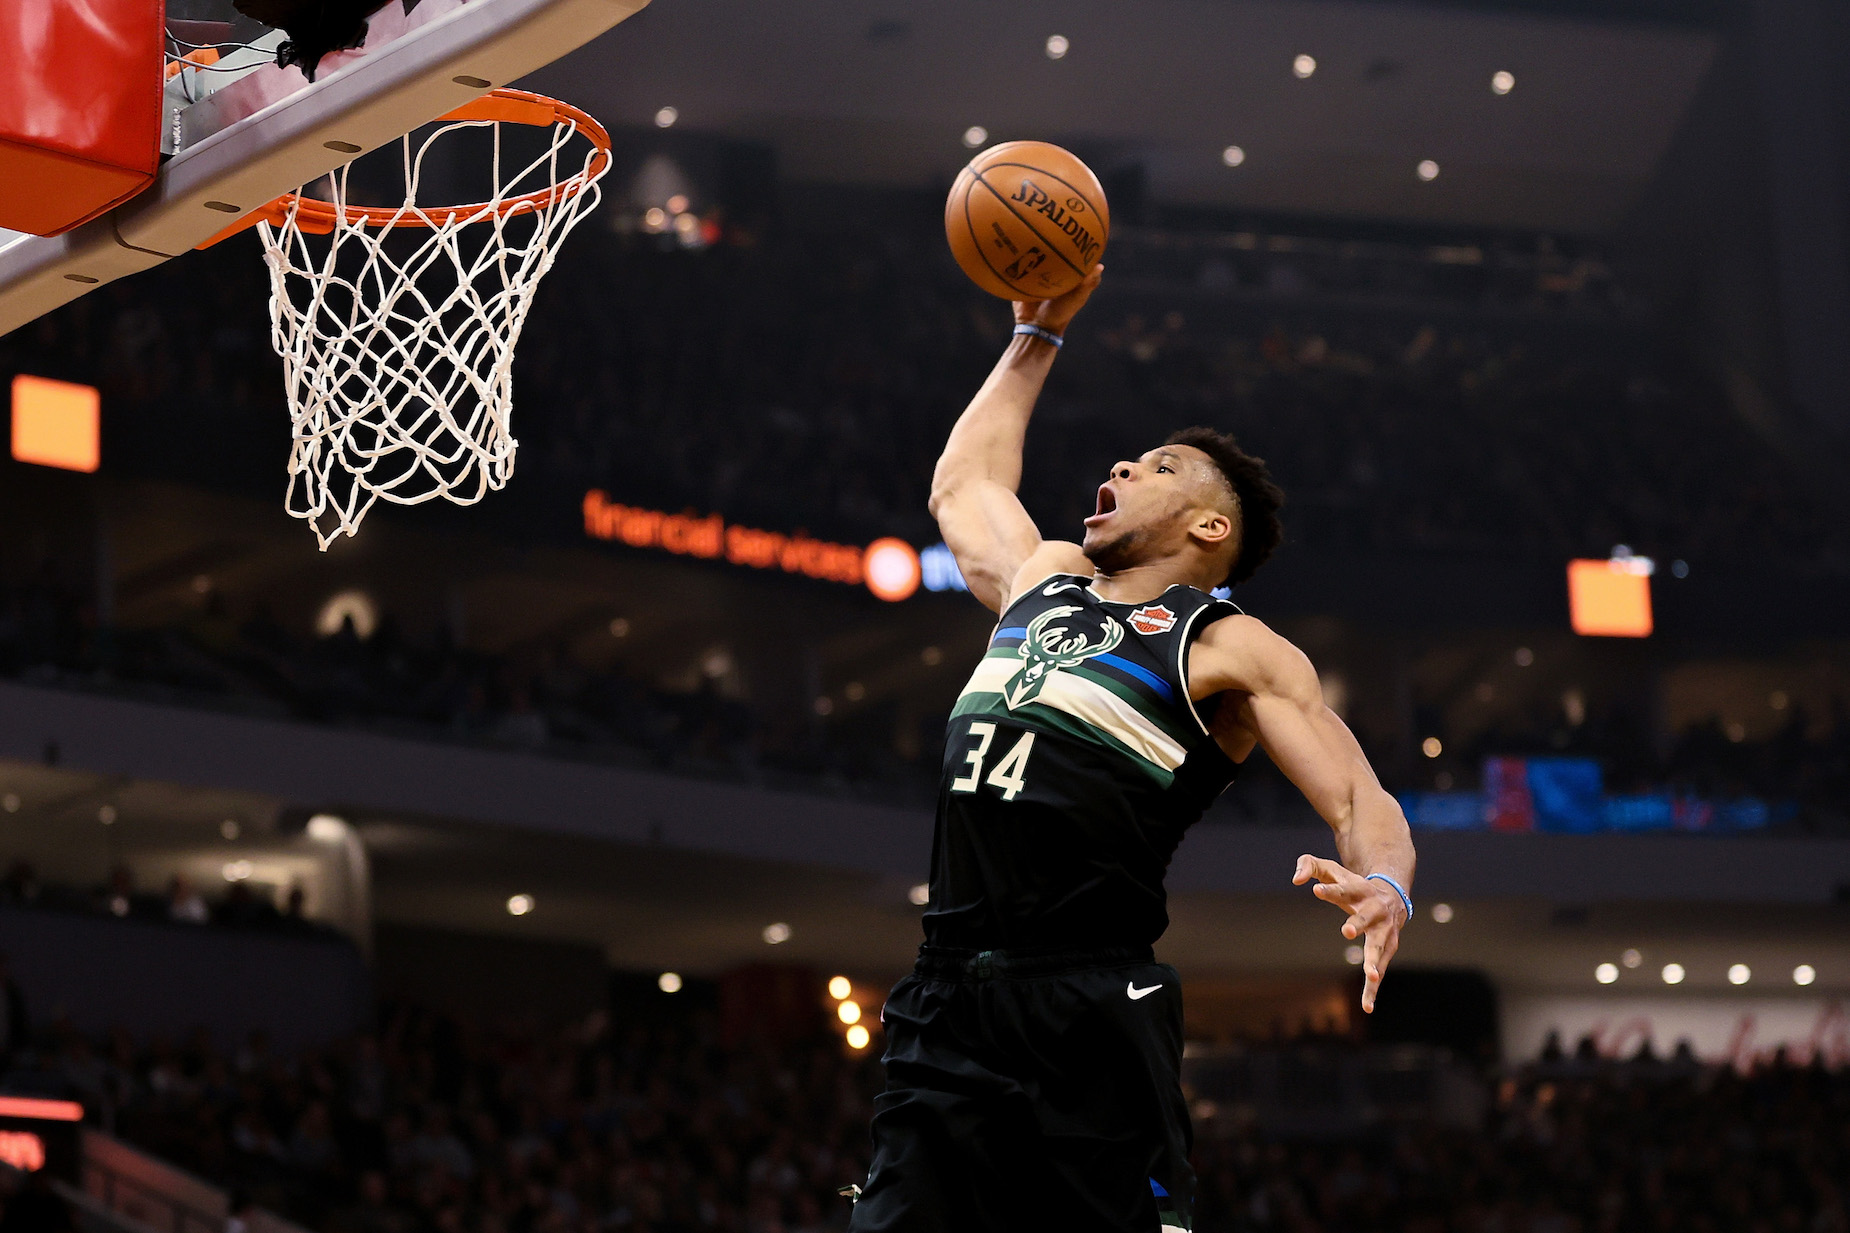 According to his Player Efficiency Rating, Giannis Antetokounmpo just finished the greatest season in modern NBA history.